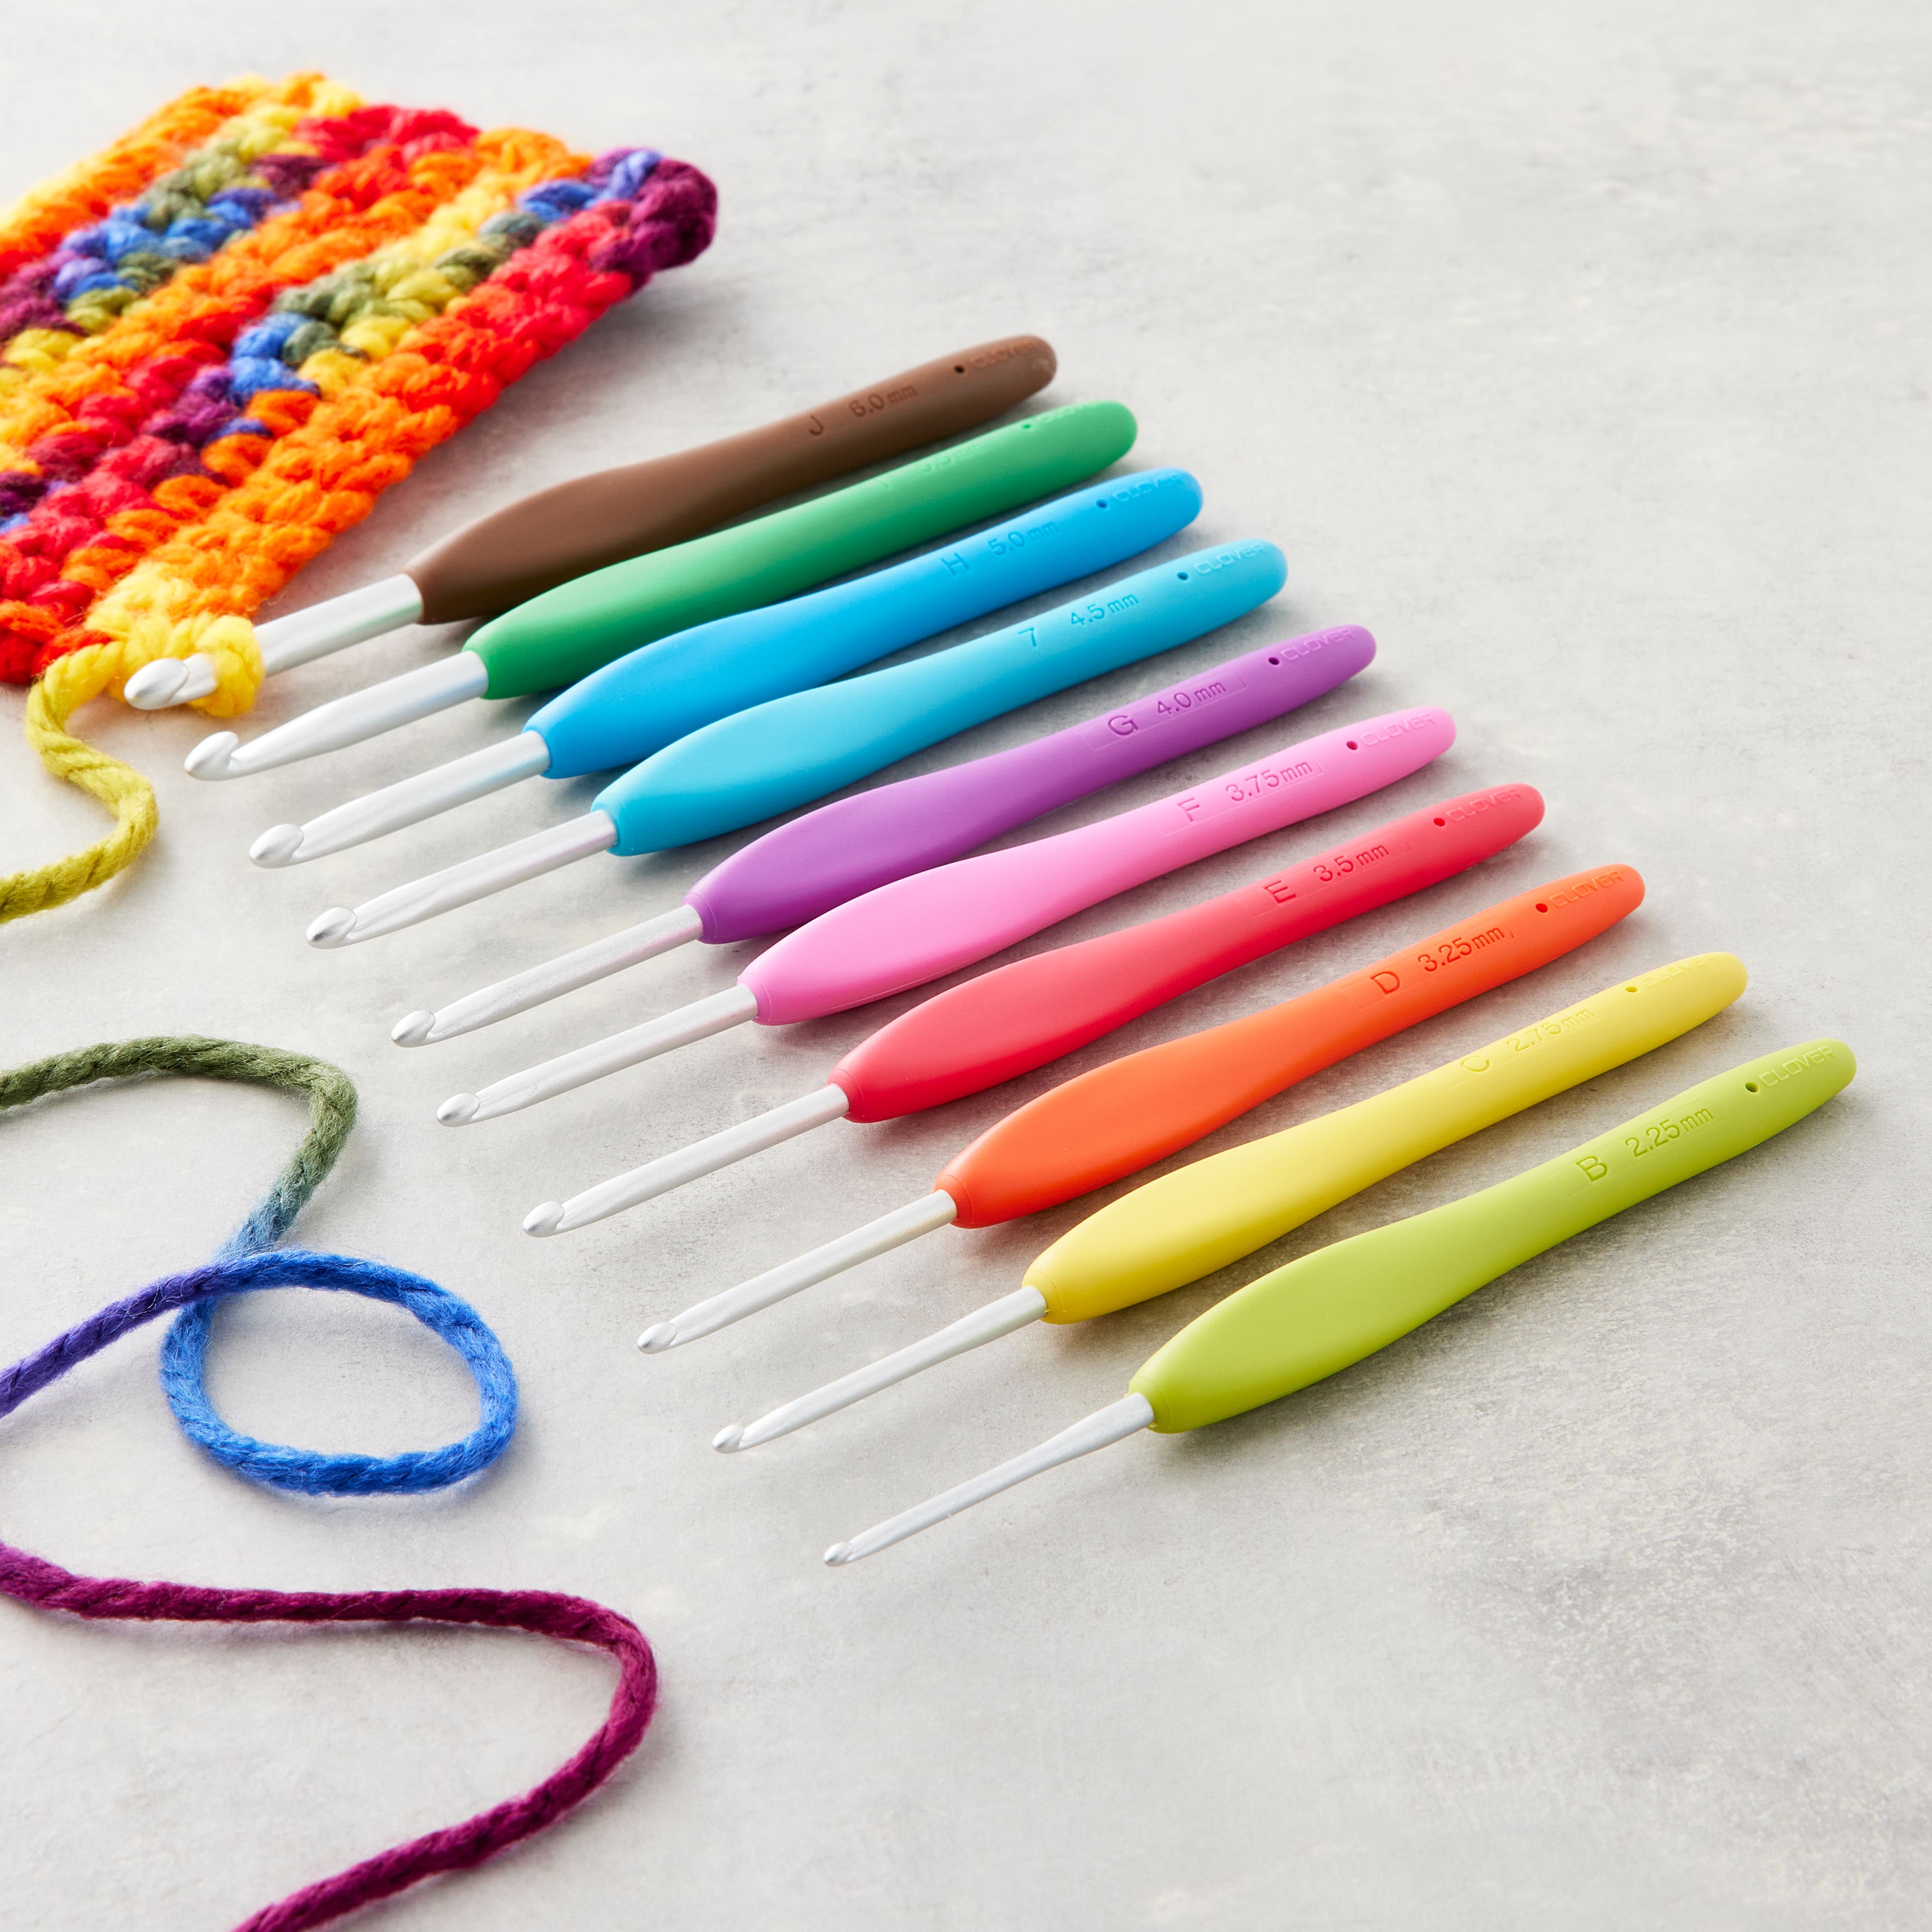 Find the Clover Amour Crochet Hook Set at Michaels